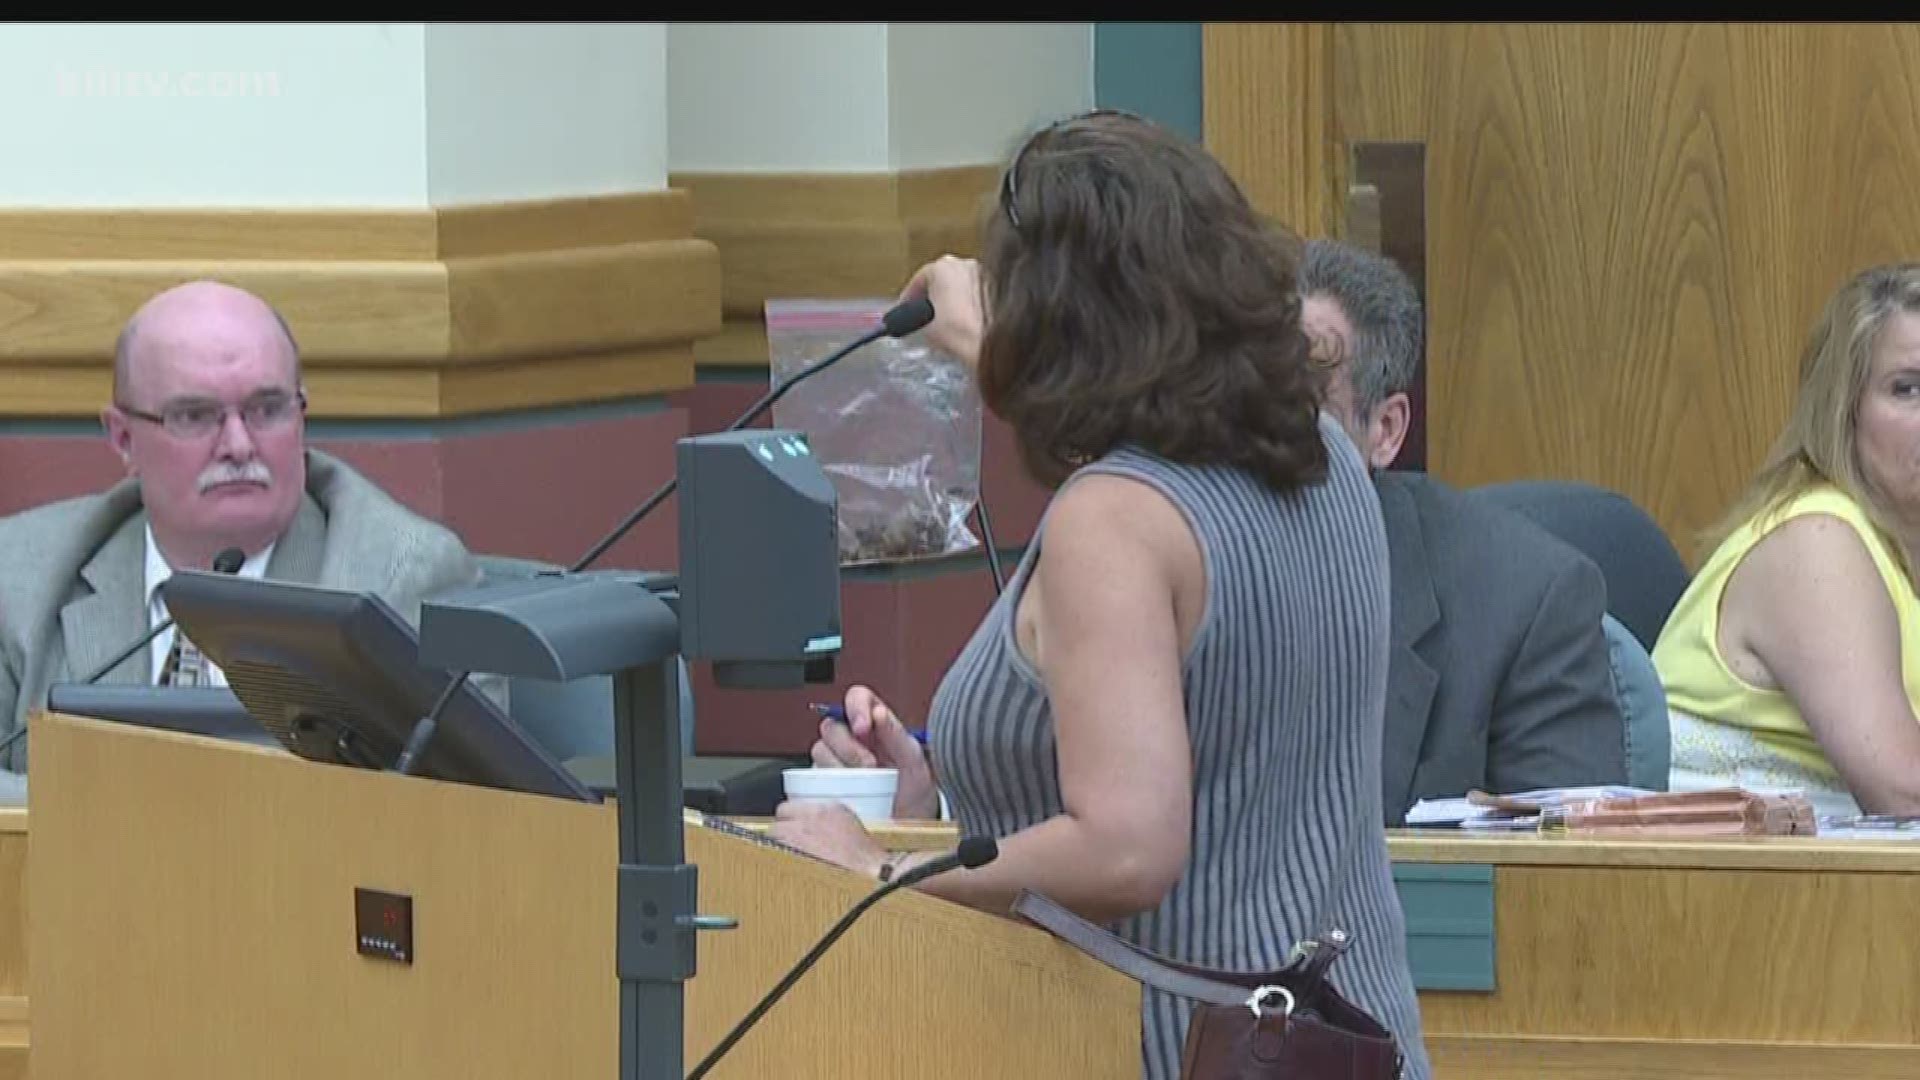 The woman handed the bag to interim City Manager Keith Selman to let him examine the evidence.